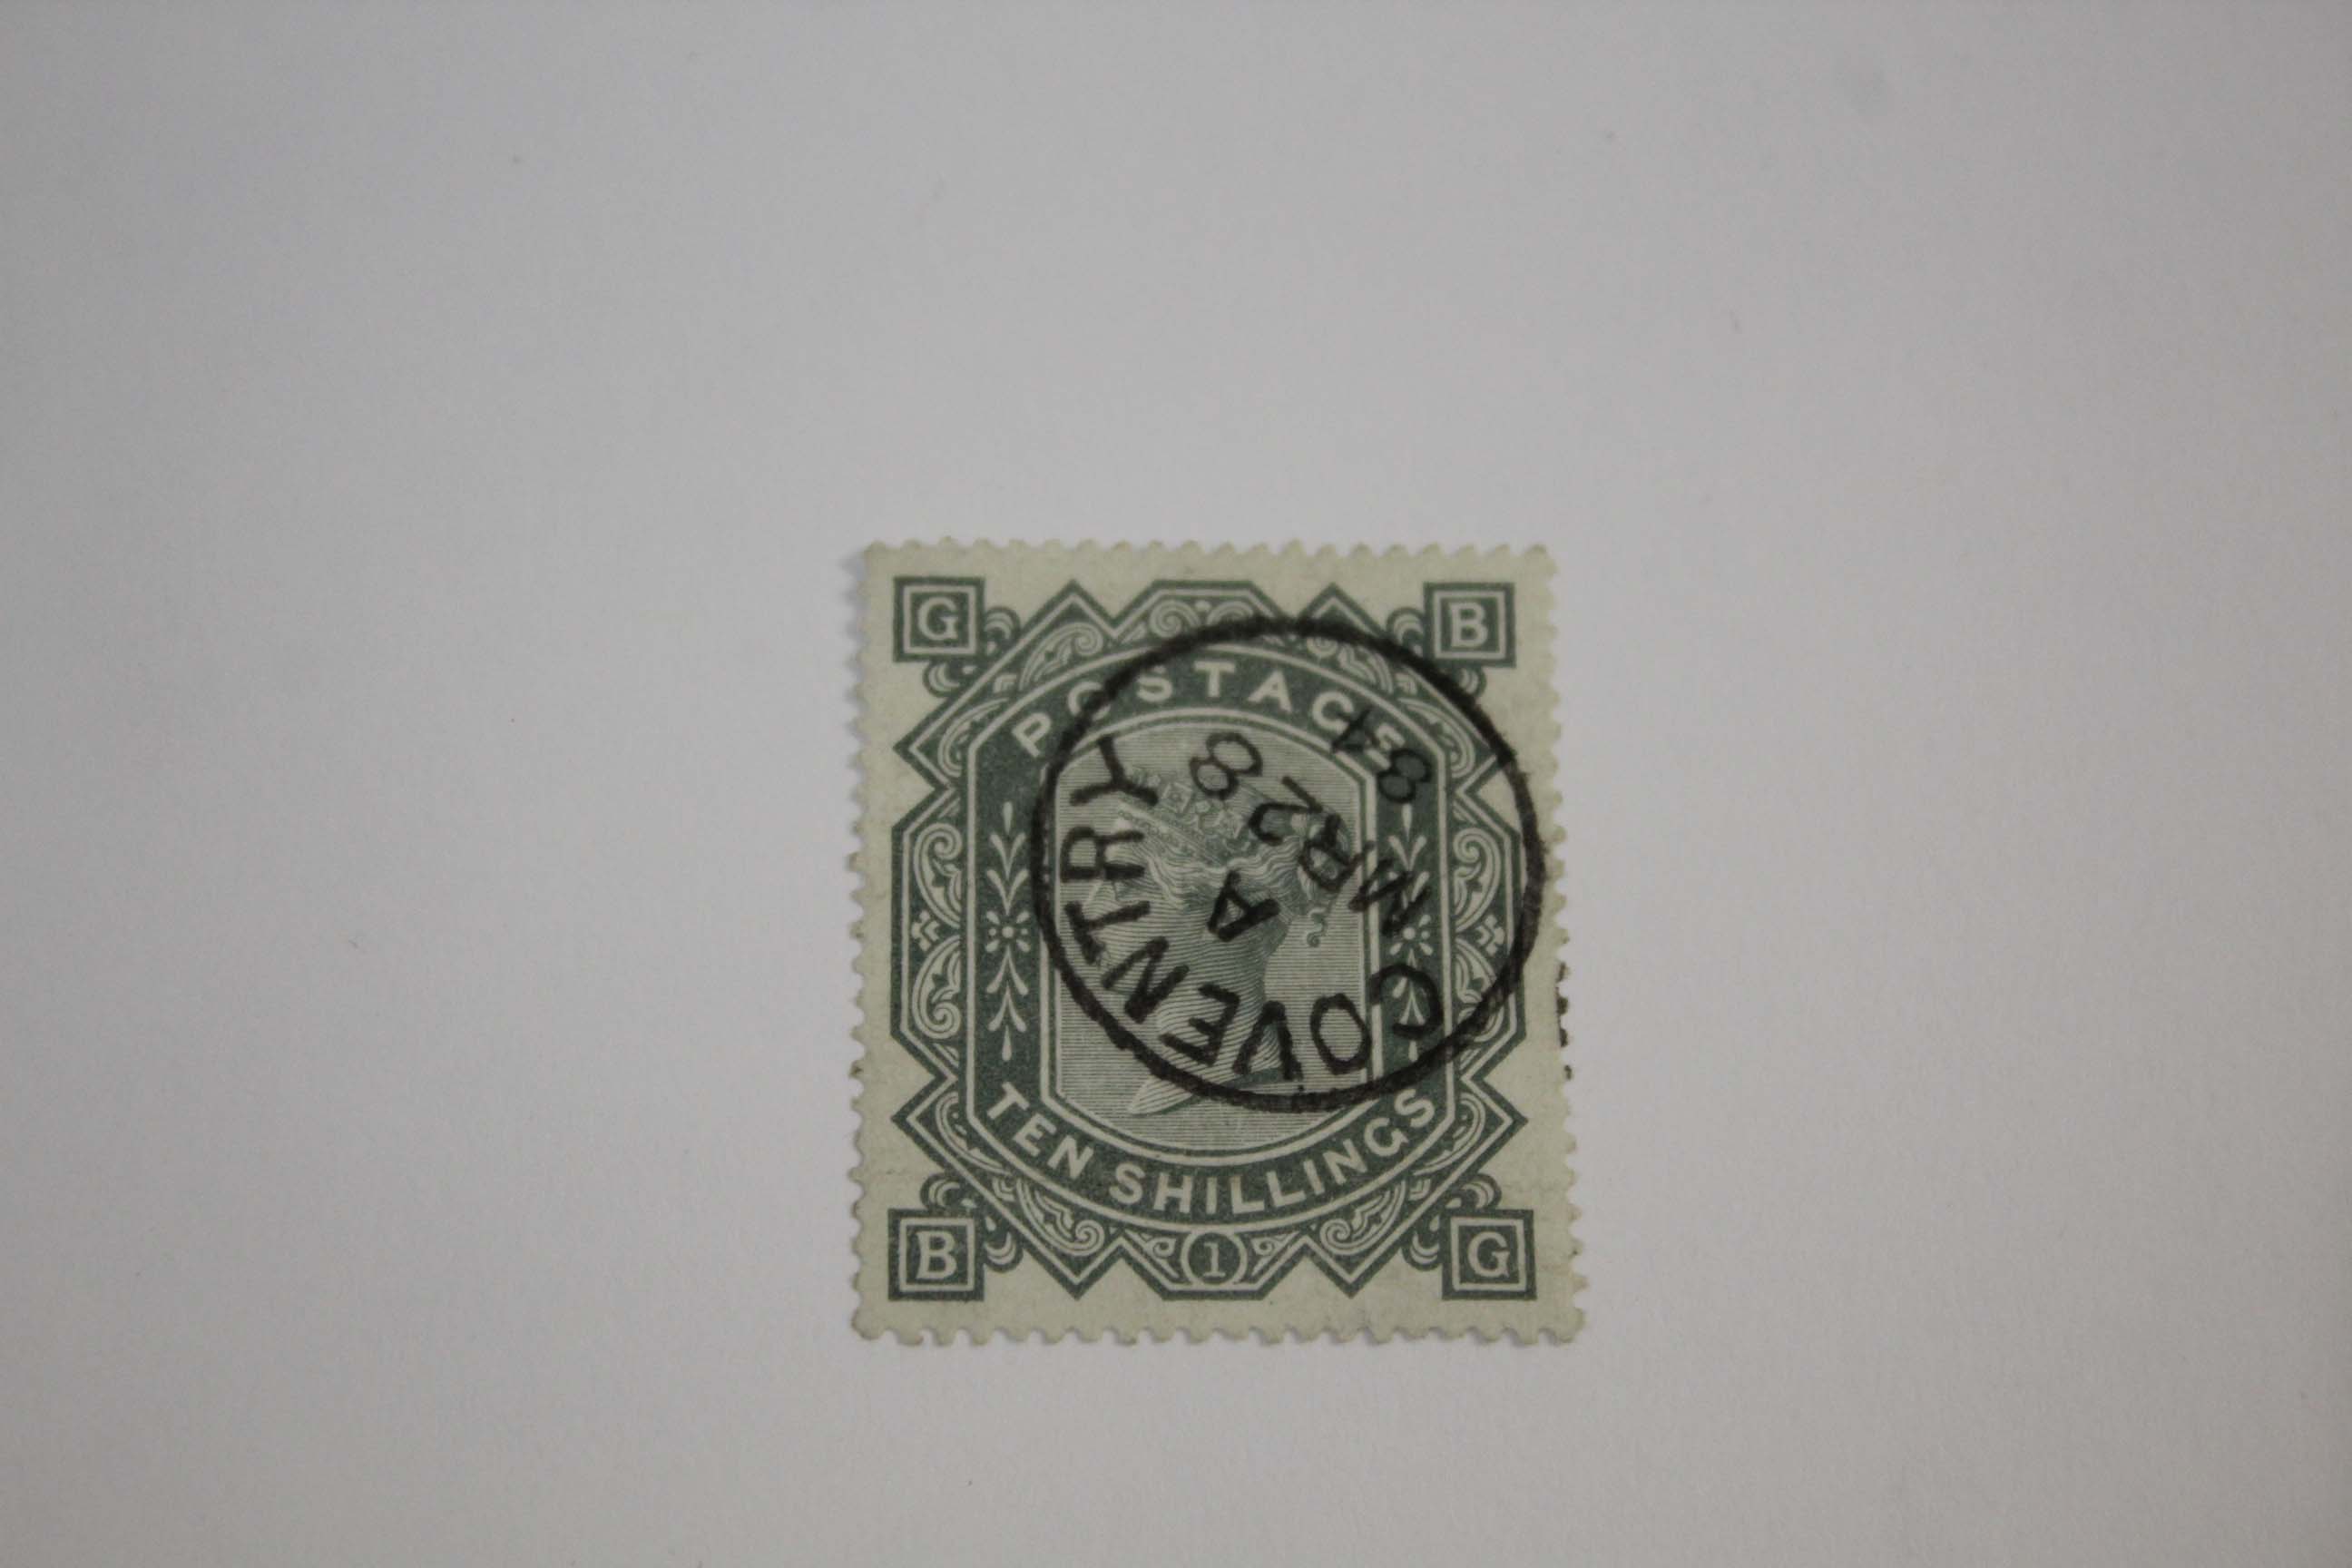 1883 TEN SHILLING STAMP a 1883 10 shilling grey green watermark Anchor fine used, small Coventry